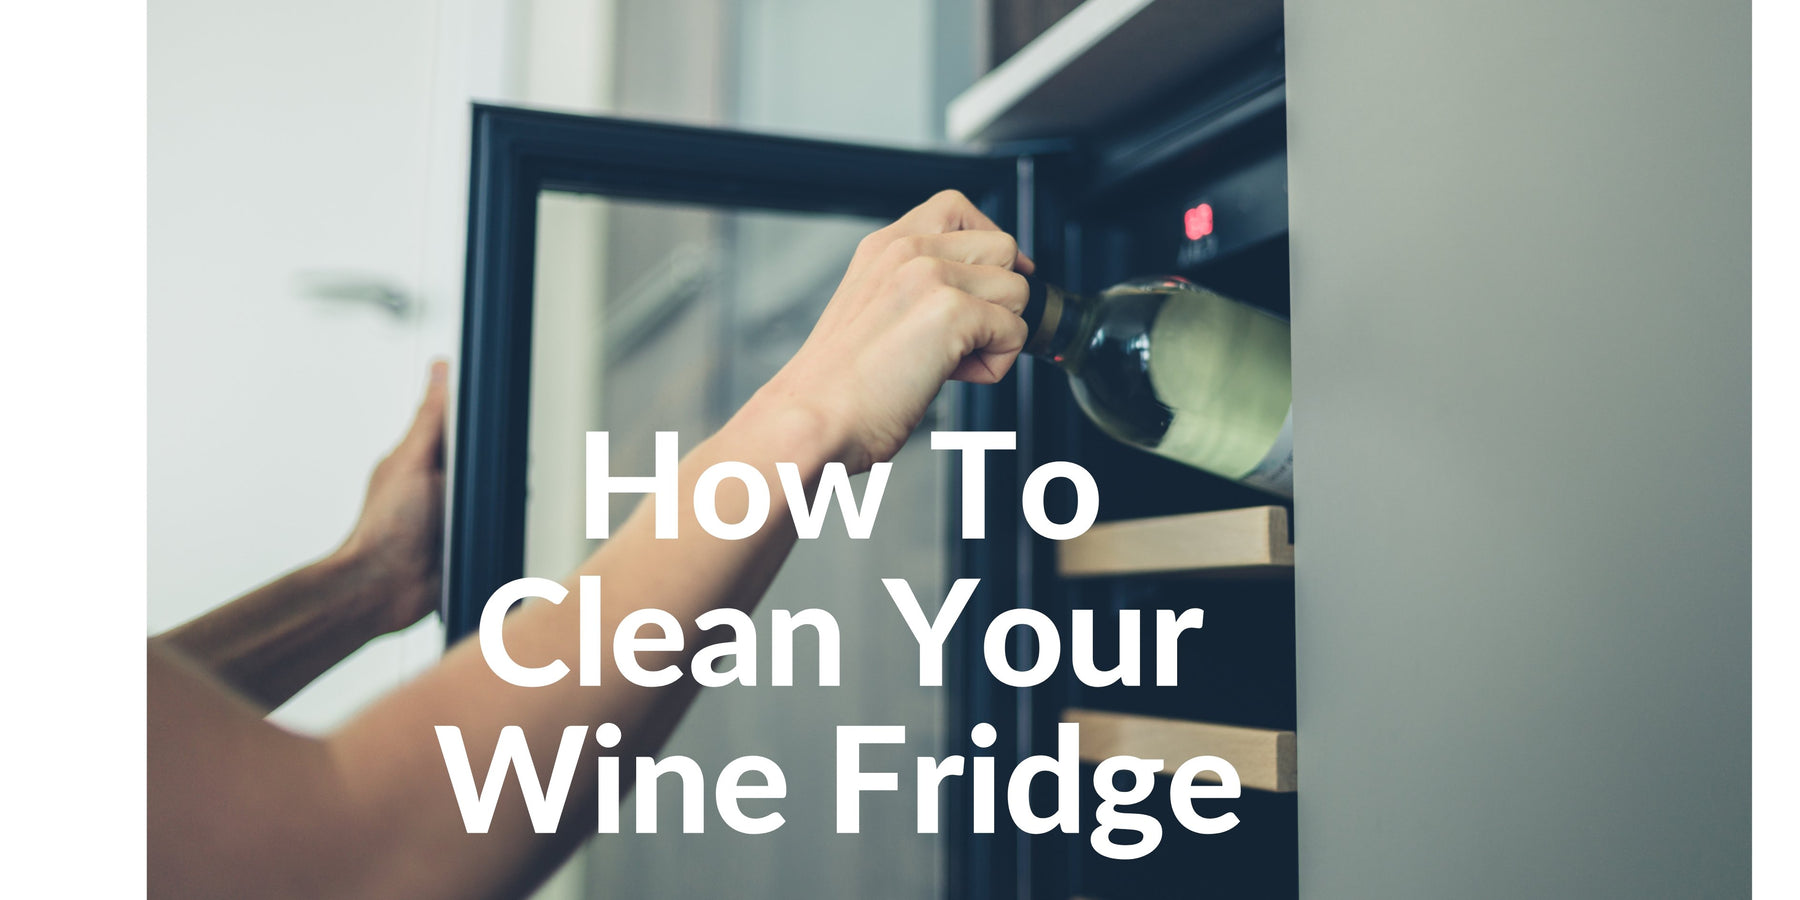 How To Clean Your Wine Fridge - Lushmist